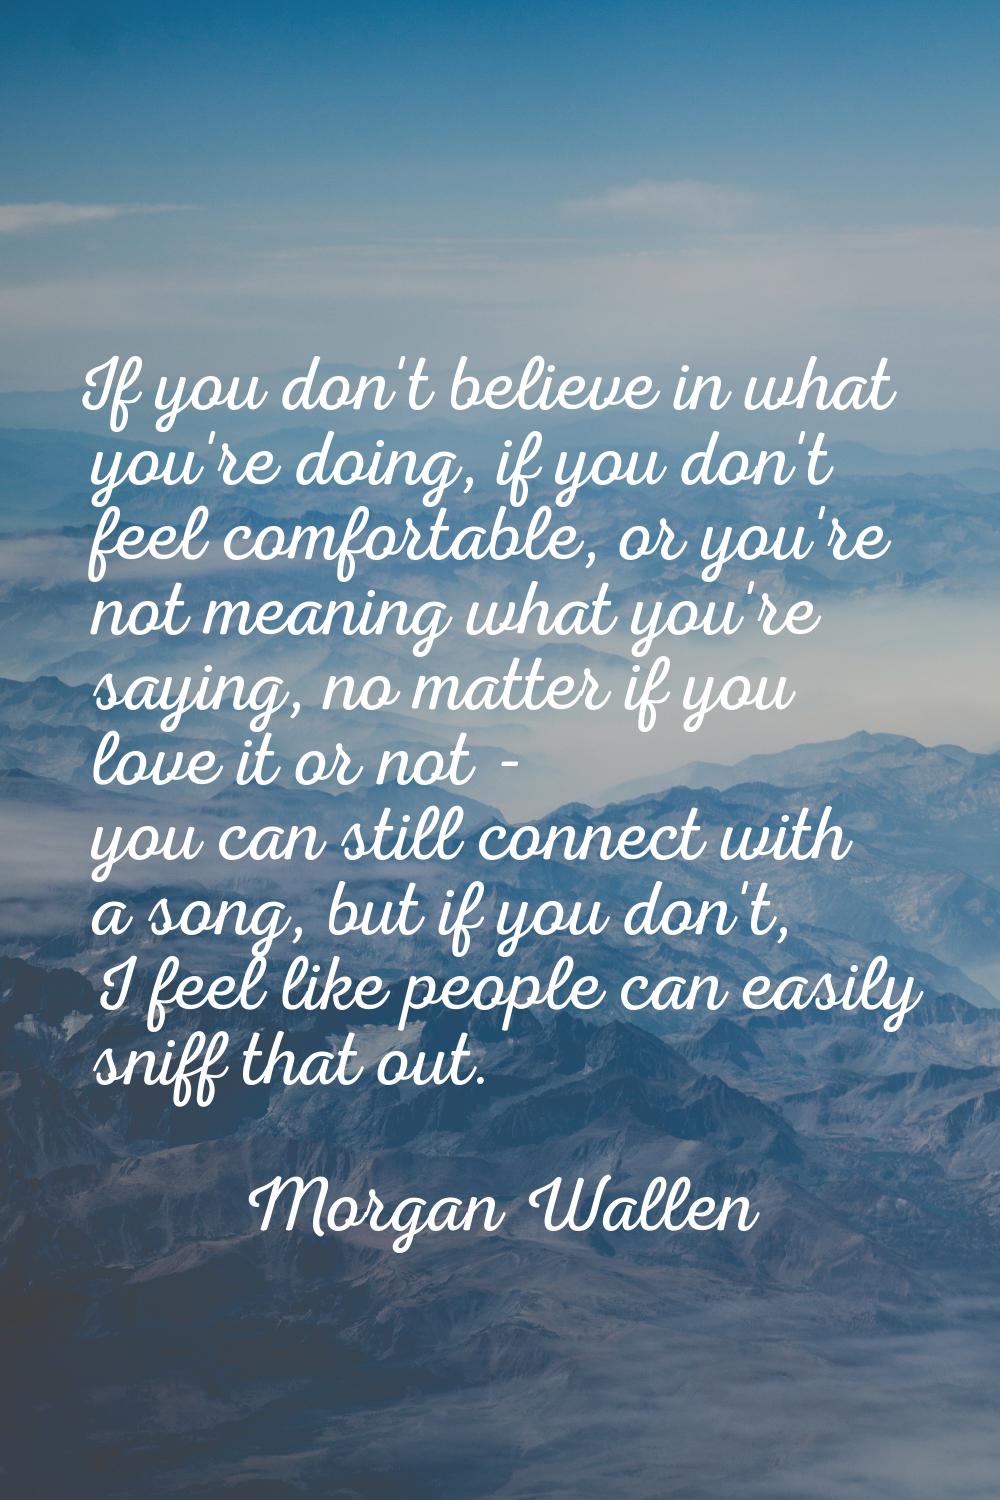 If you don't believe in what you're doing, if you don't feel comfortable, or you're not meaning wha